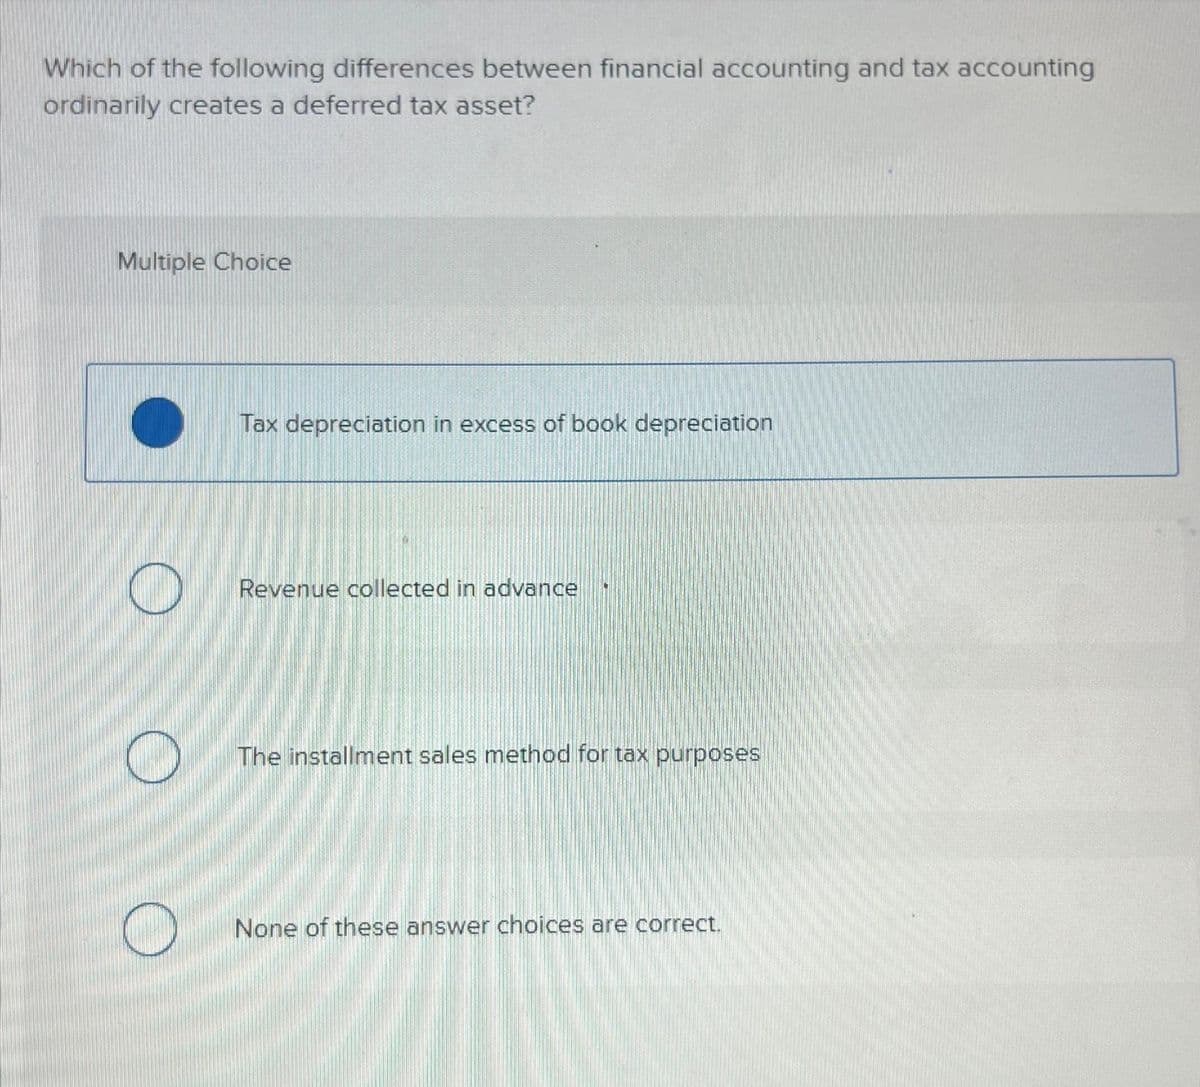 Which of the following differences between financial accounting and tax accounting
ordinarily creates a deferred tax asset?
Multiple Choice
O
O
Tax depreciation in excess of book depreciation
Revenue collected in advance
The installment sales method for tax purposes
None of these answer choices are correct.